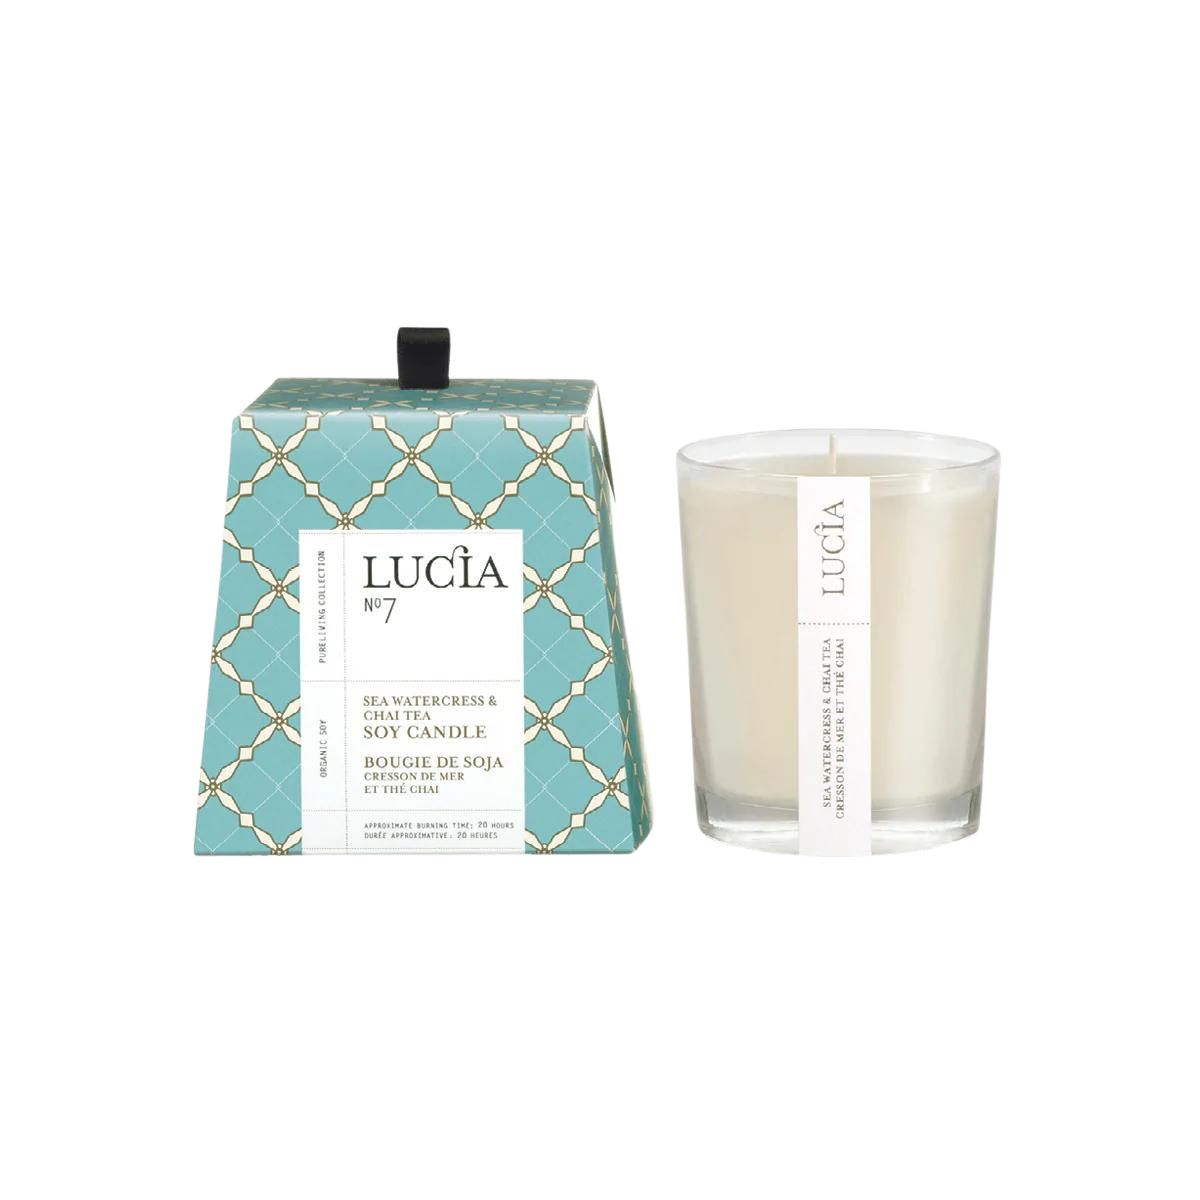 Lucia Home Collection, Beautifully Boxed Candles